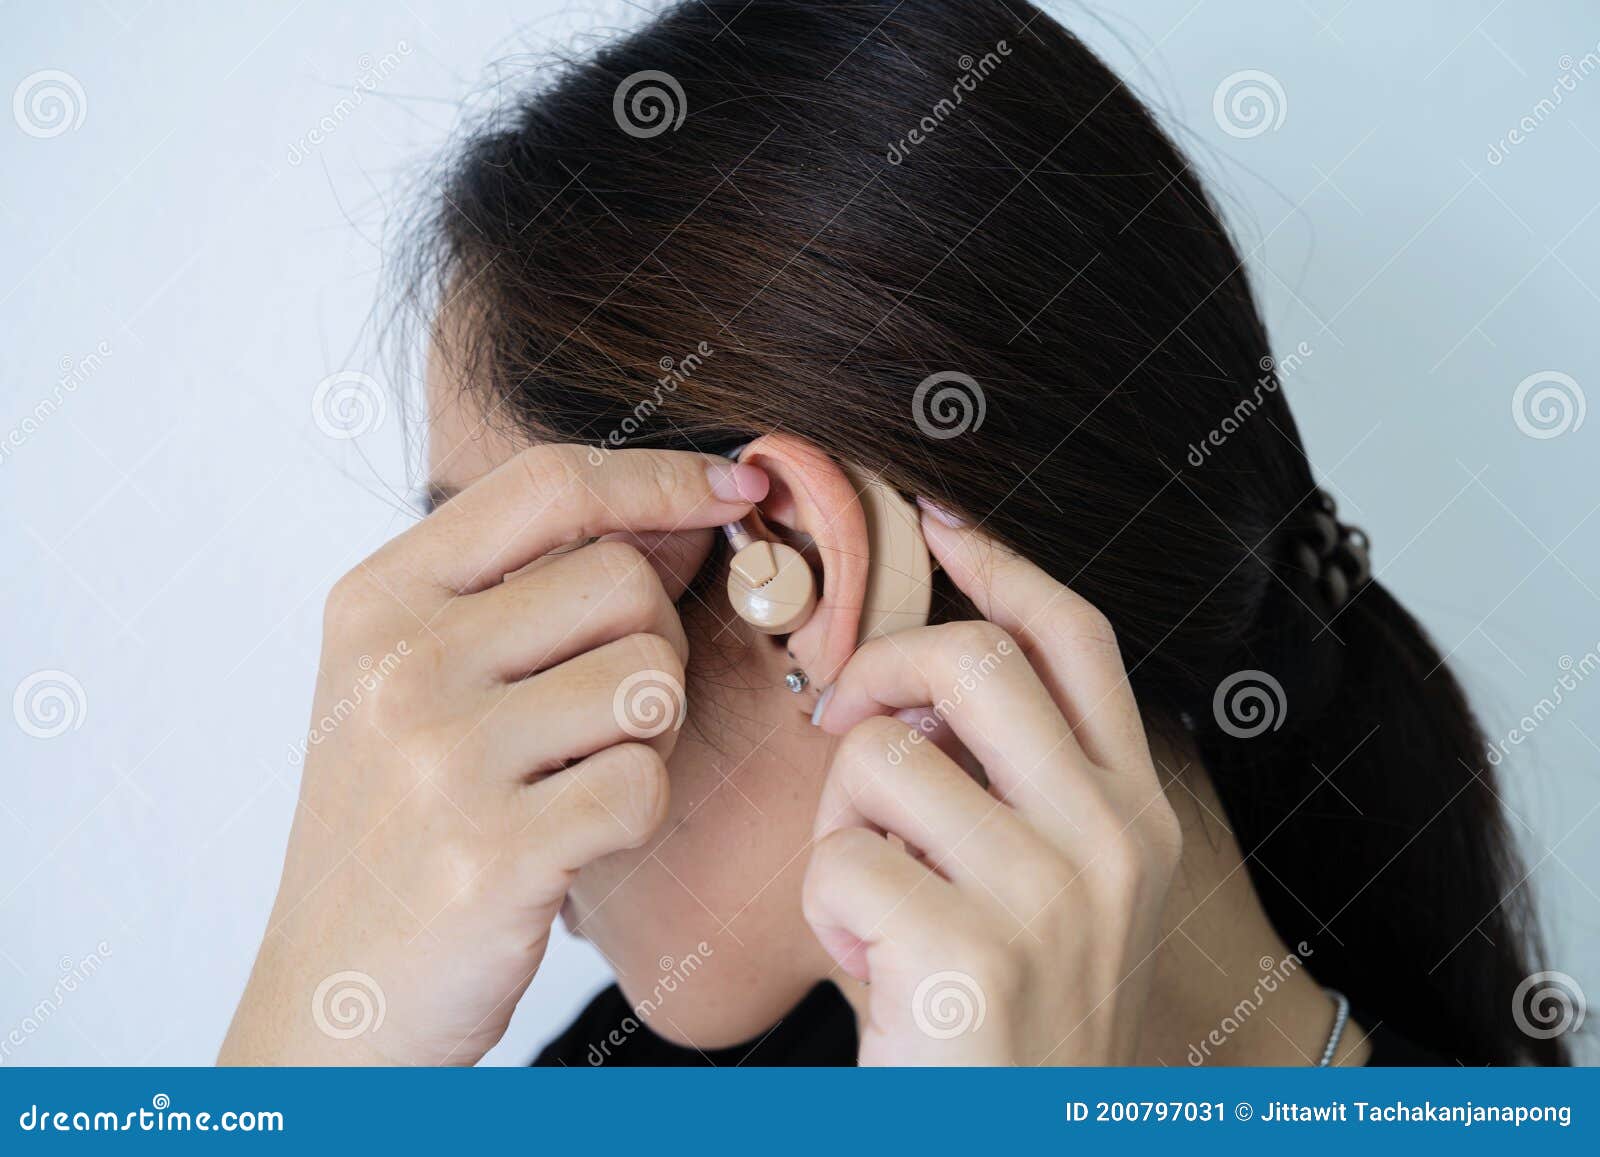 Asian Women Are Wearing Hearing Aids In Order To Hear Better Stock Image Image Of Closeup 